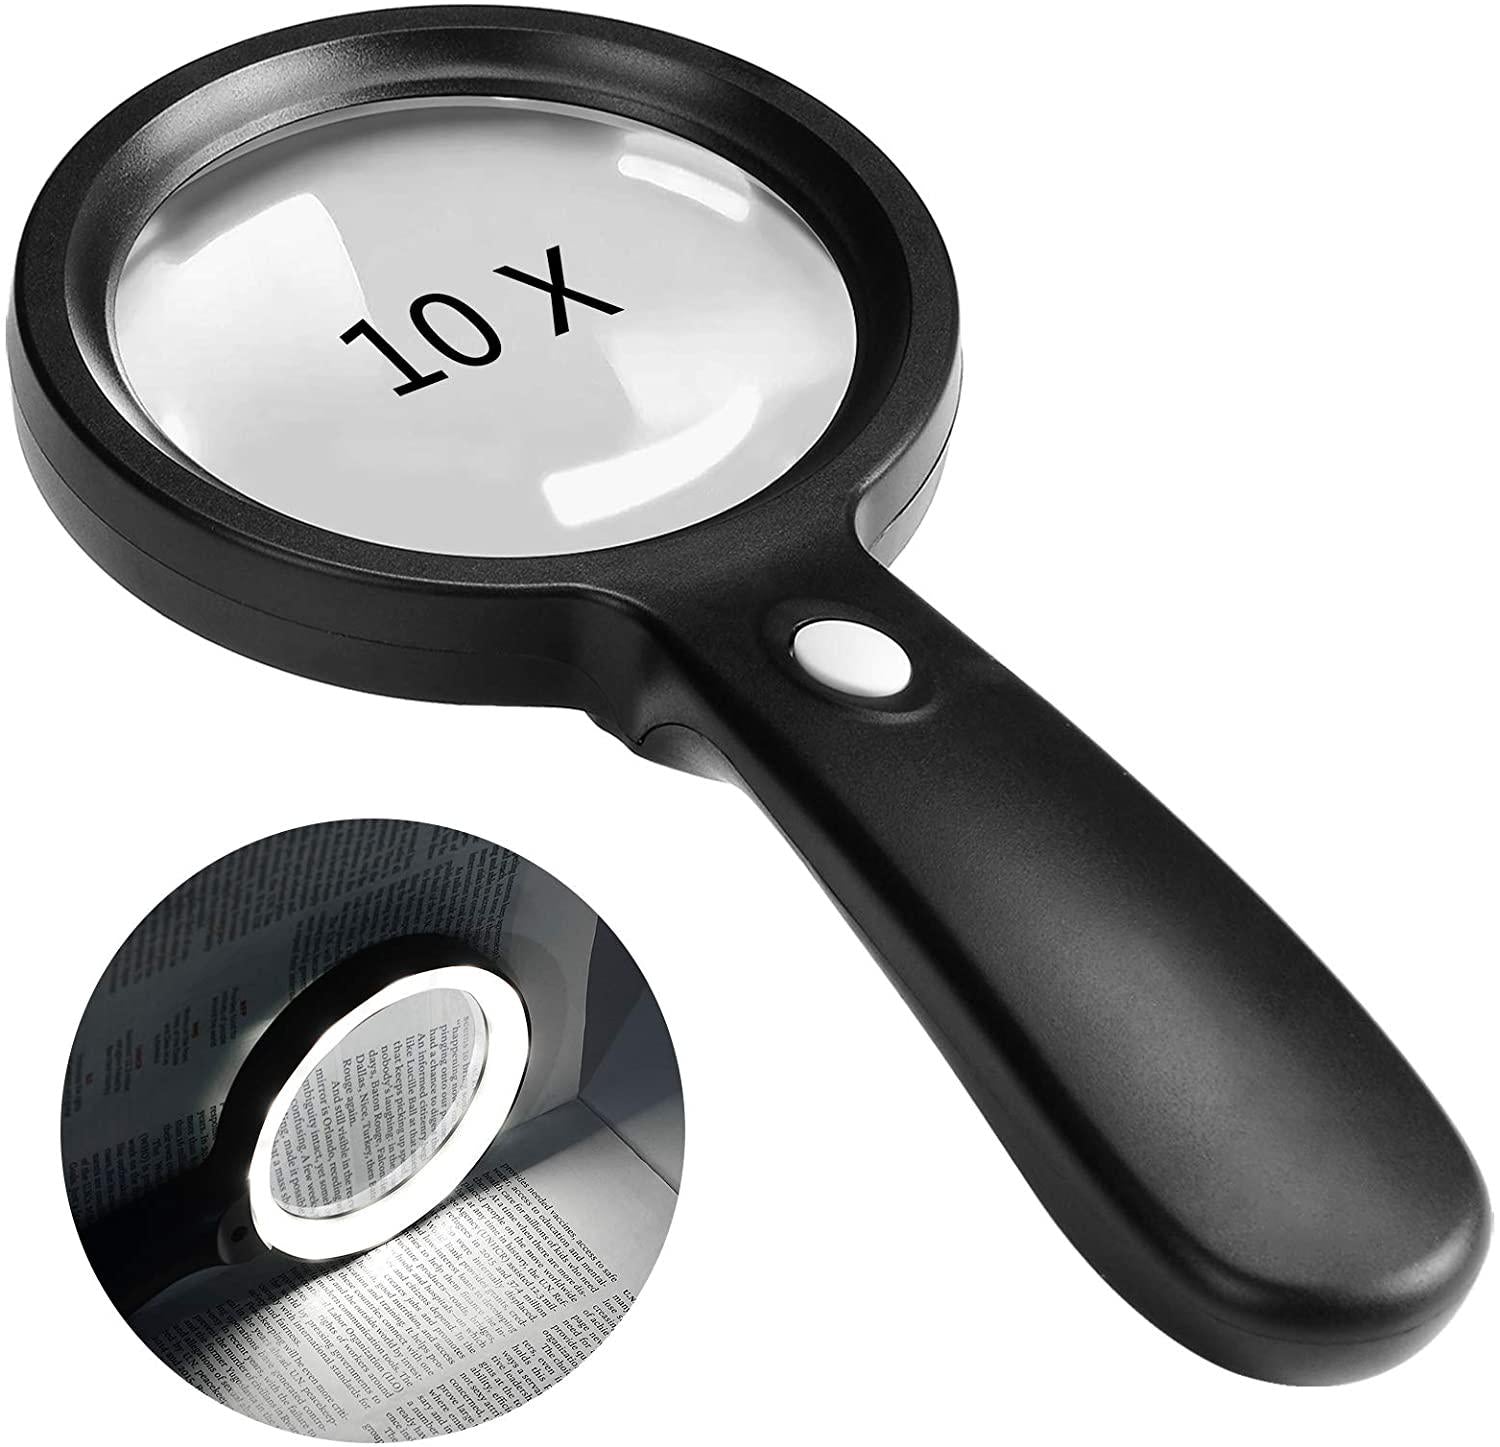 JMH, Magnifying Glass with Light, 10X Handheld Large Magnifying Glass 12 LED Illuminated Lighted Magnifier for Macular Degeneration, Seniors Reading, Soldering, Inspection, Coins, Jewelry, Exploring